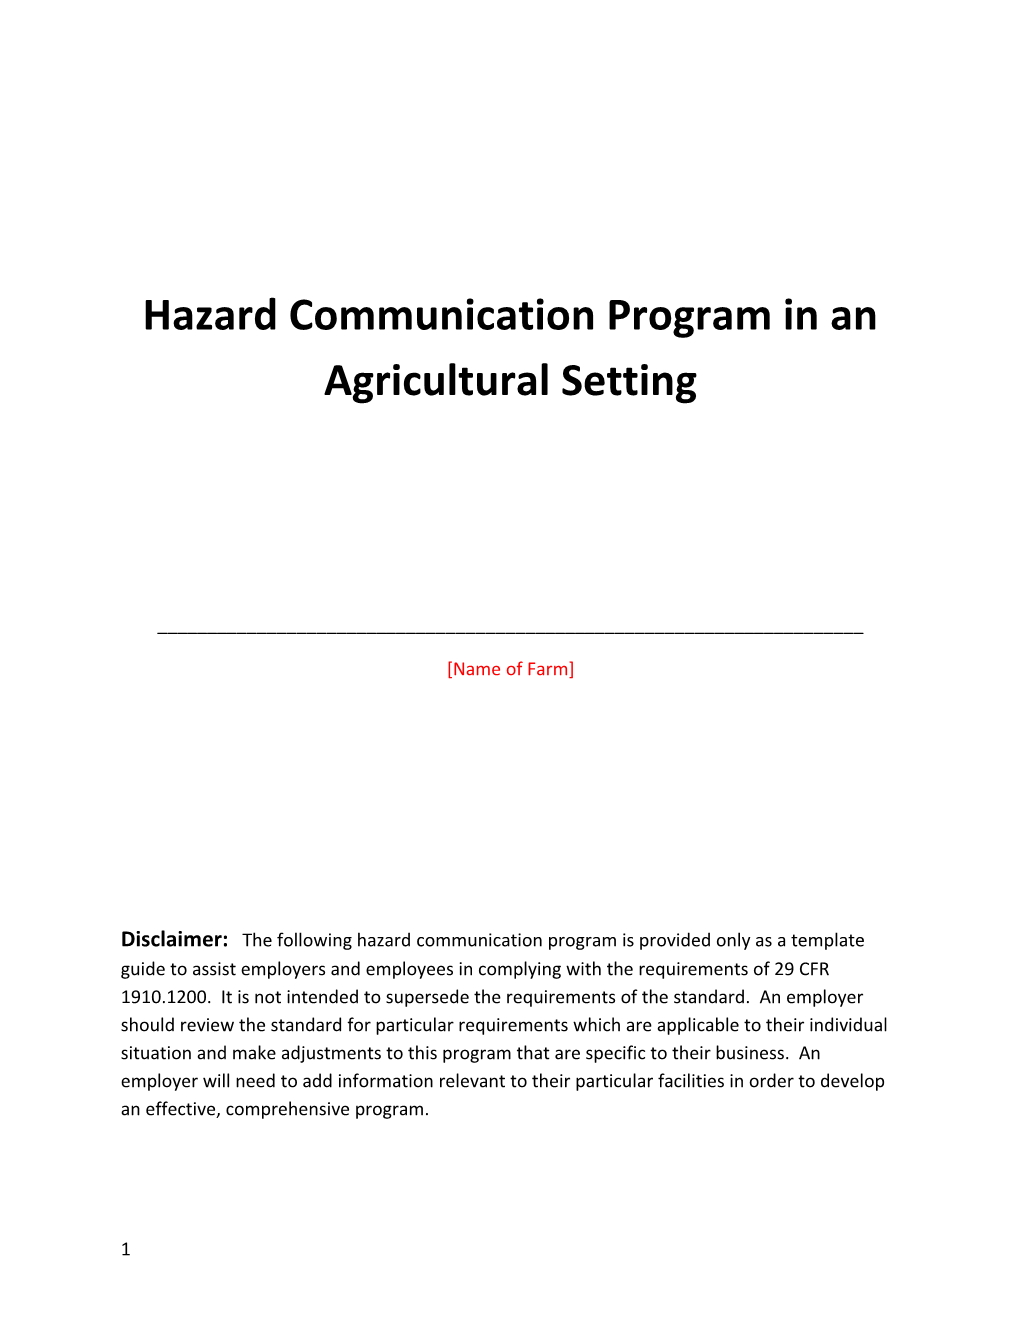 Hazard Communication Program in an Agricultural Setting